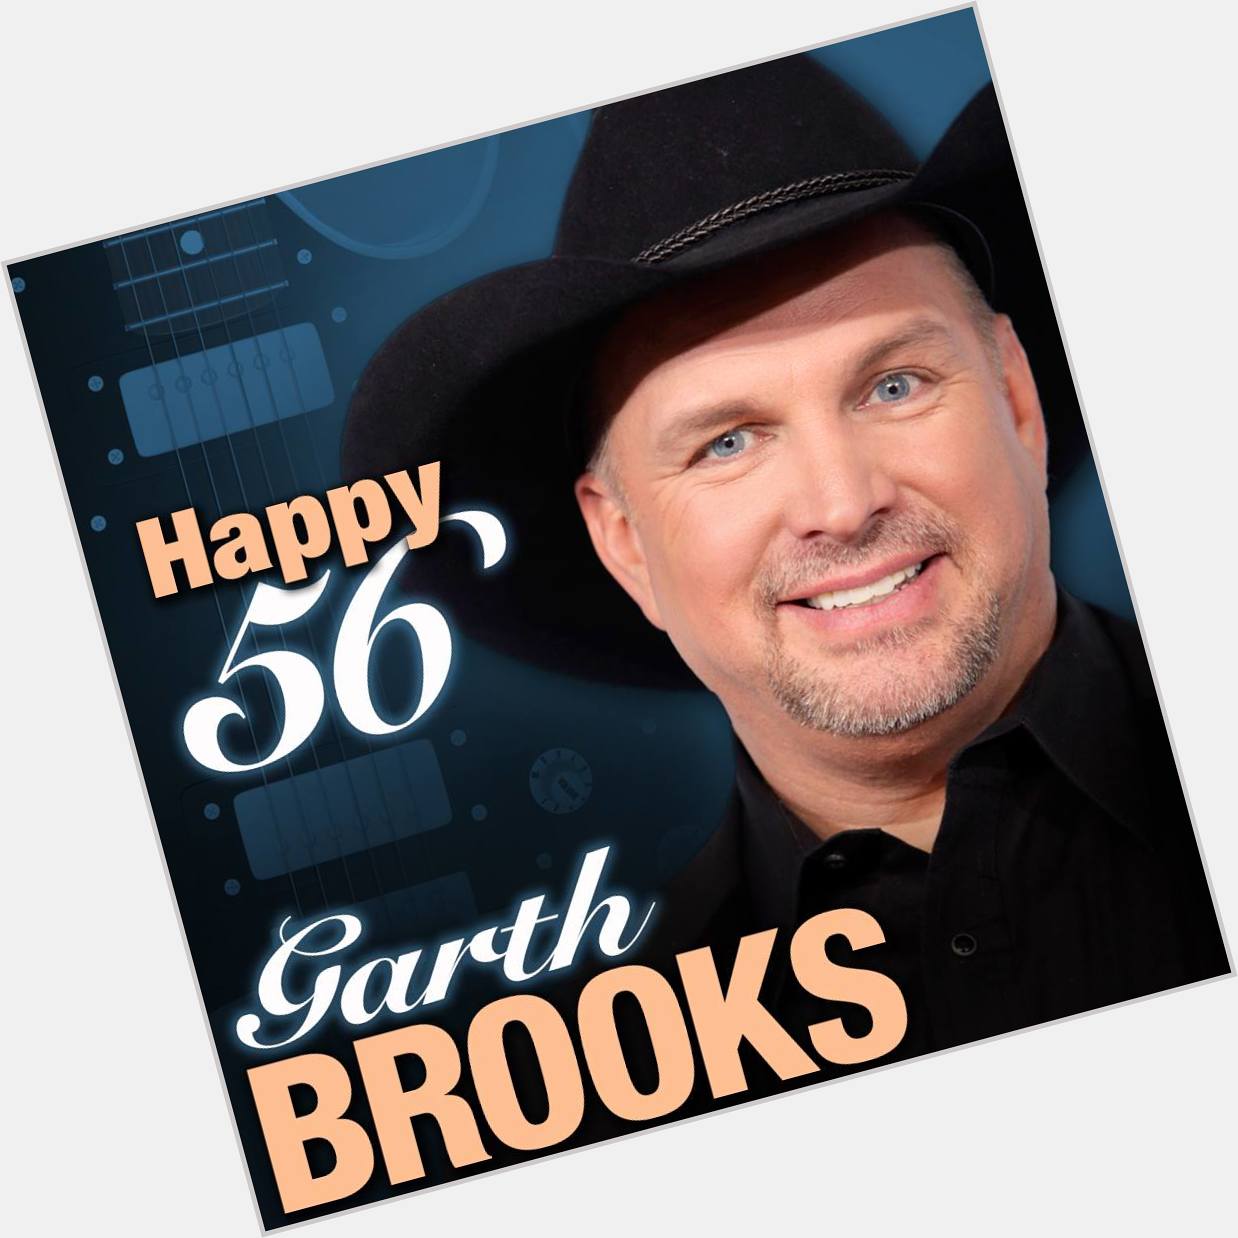 A very happy 56th birthday to singer, songwriter Garth Brooks. 